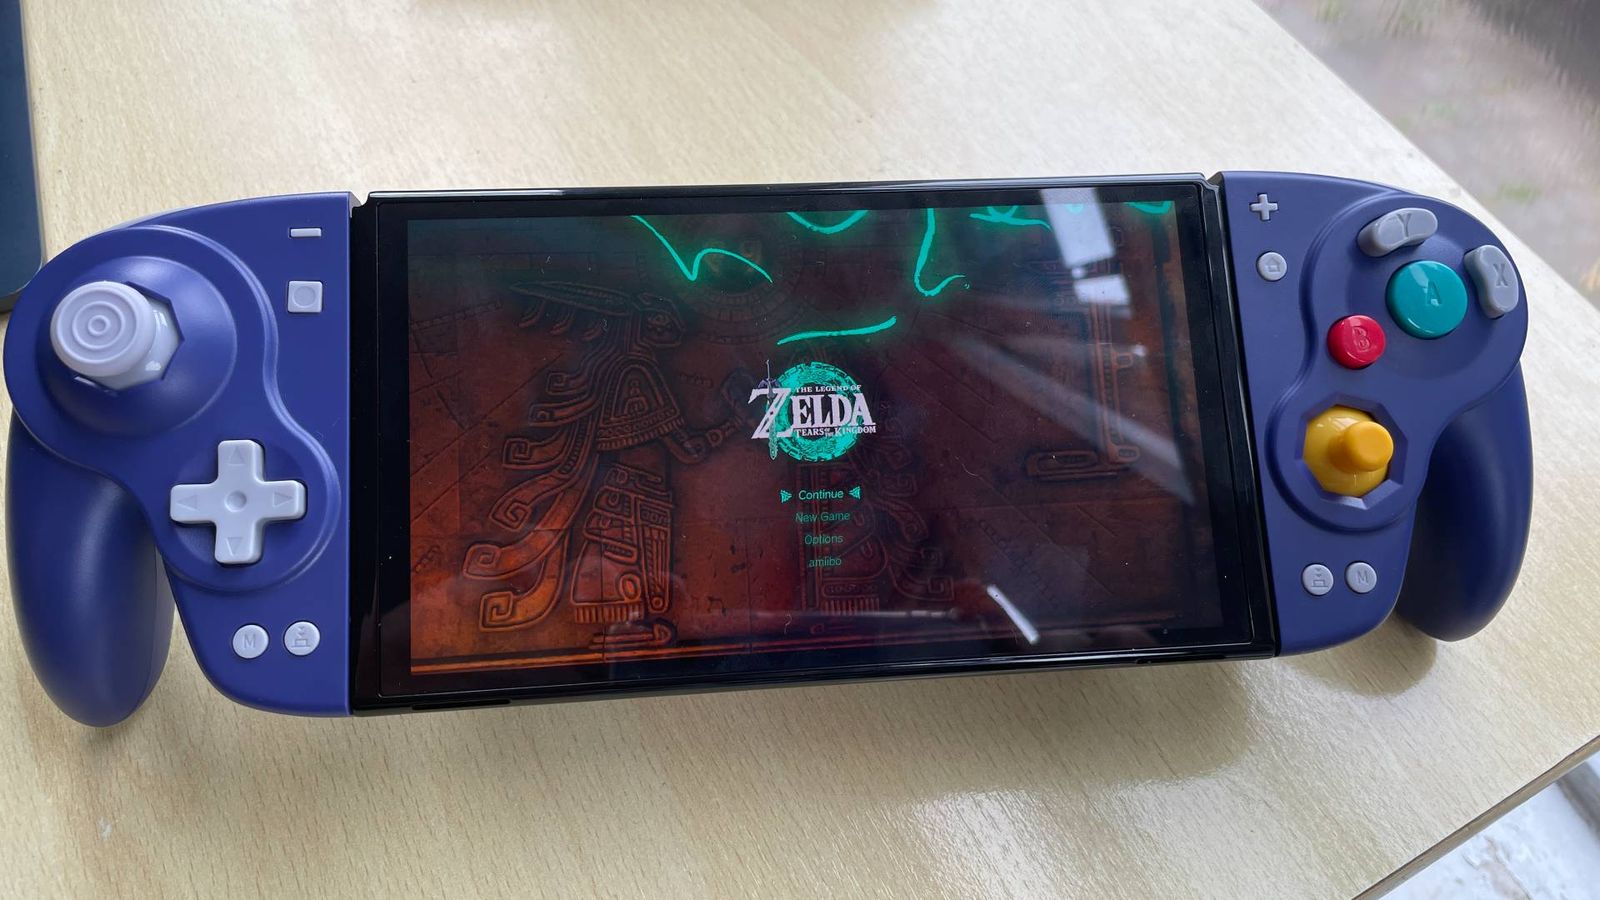 The DOYOKY Wireless Joy-Con retro game controller with a Nintendo Switch running The Legend of Zelda: Tears of the Kingdom.